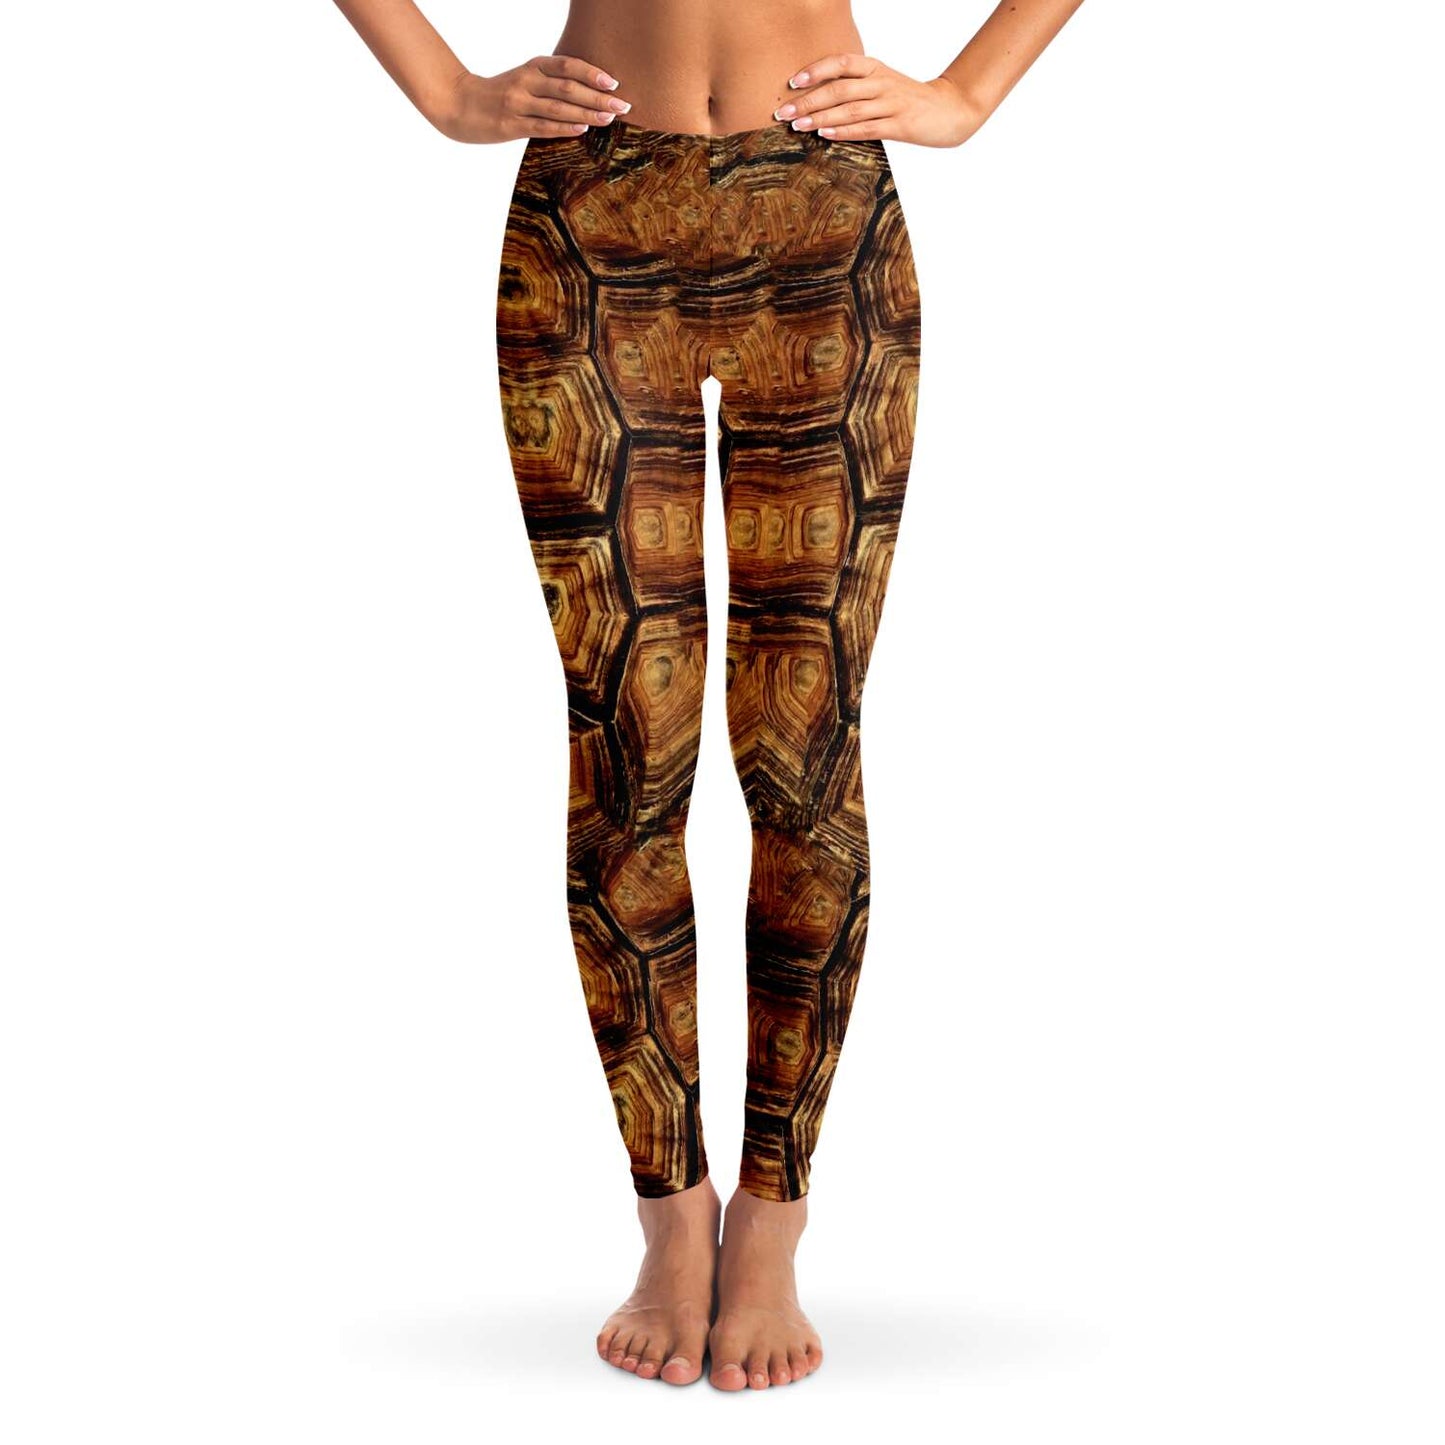 Front view of turtle leggings / skins on model